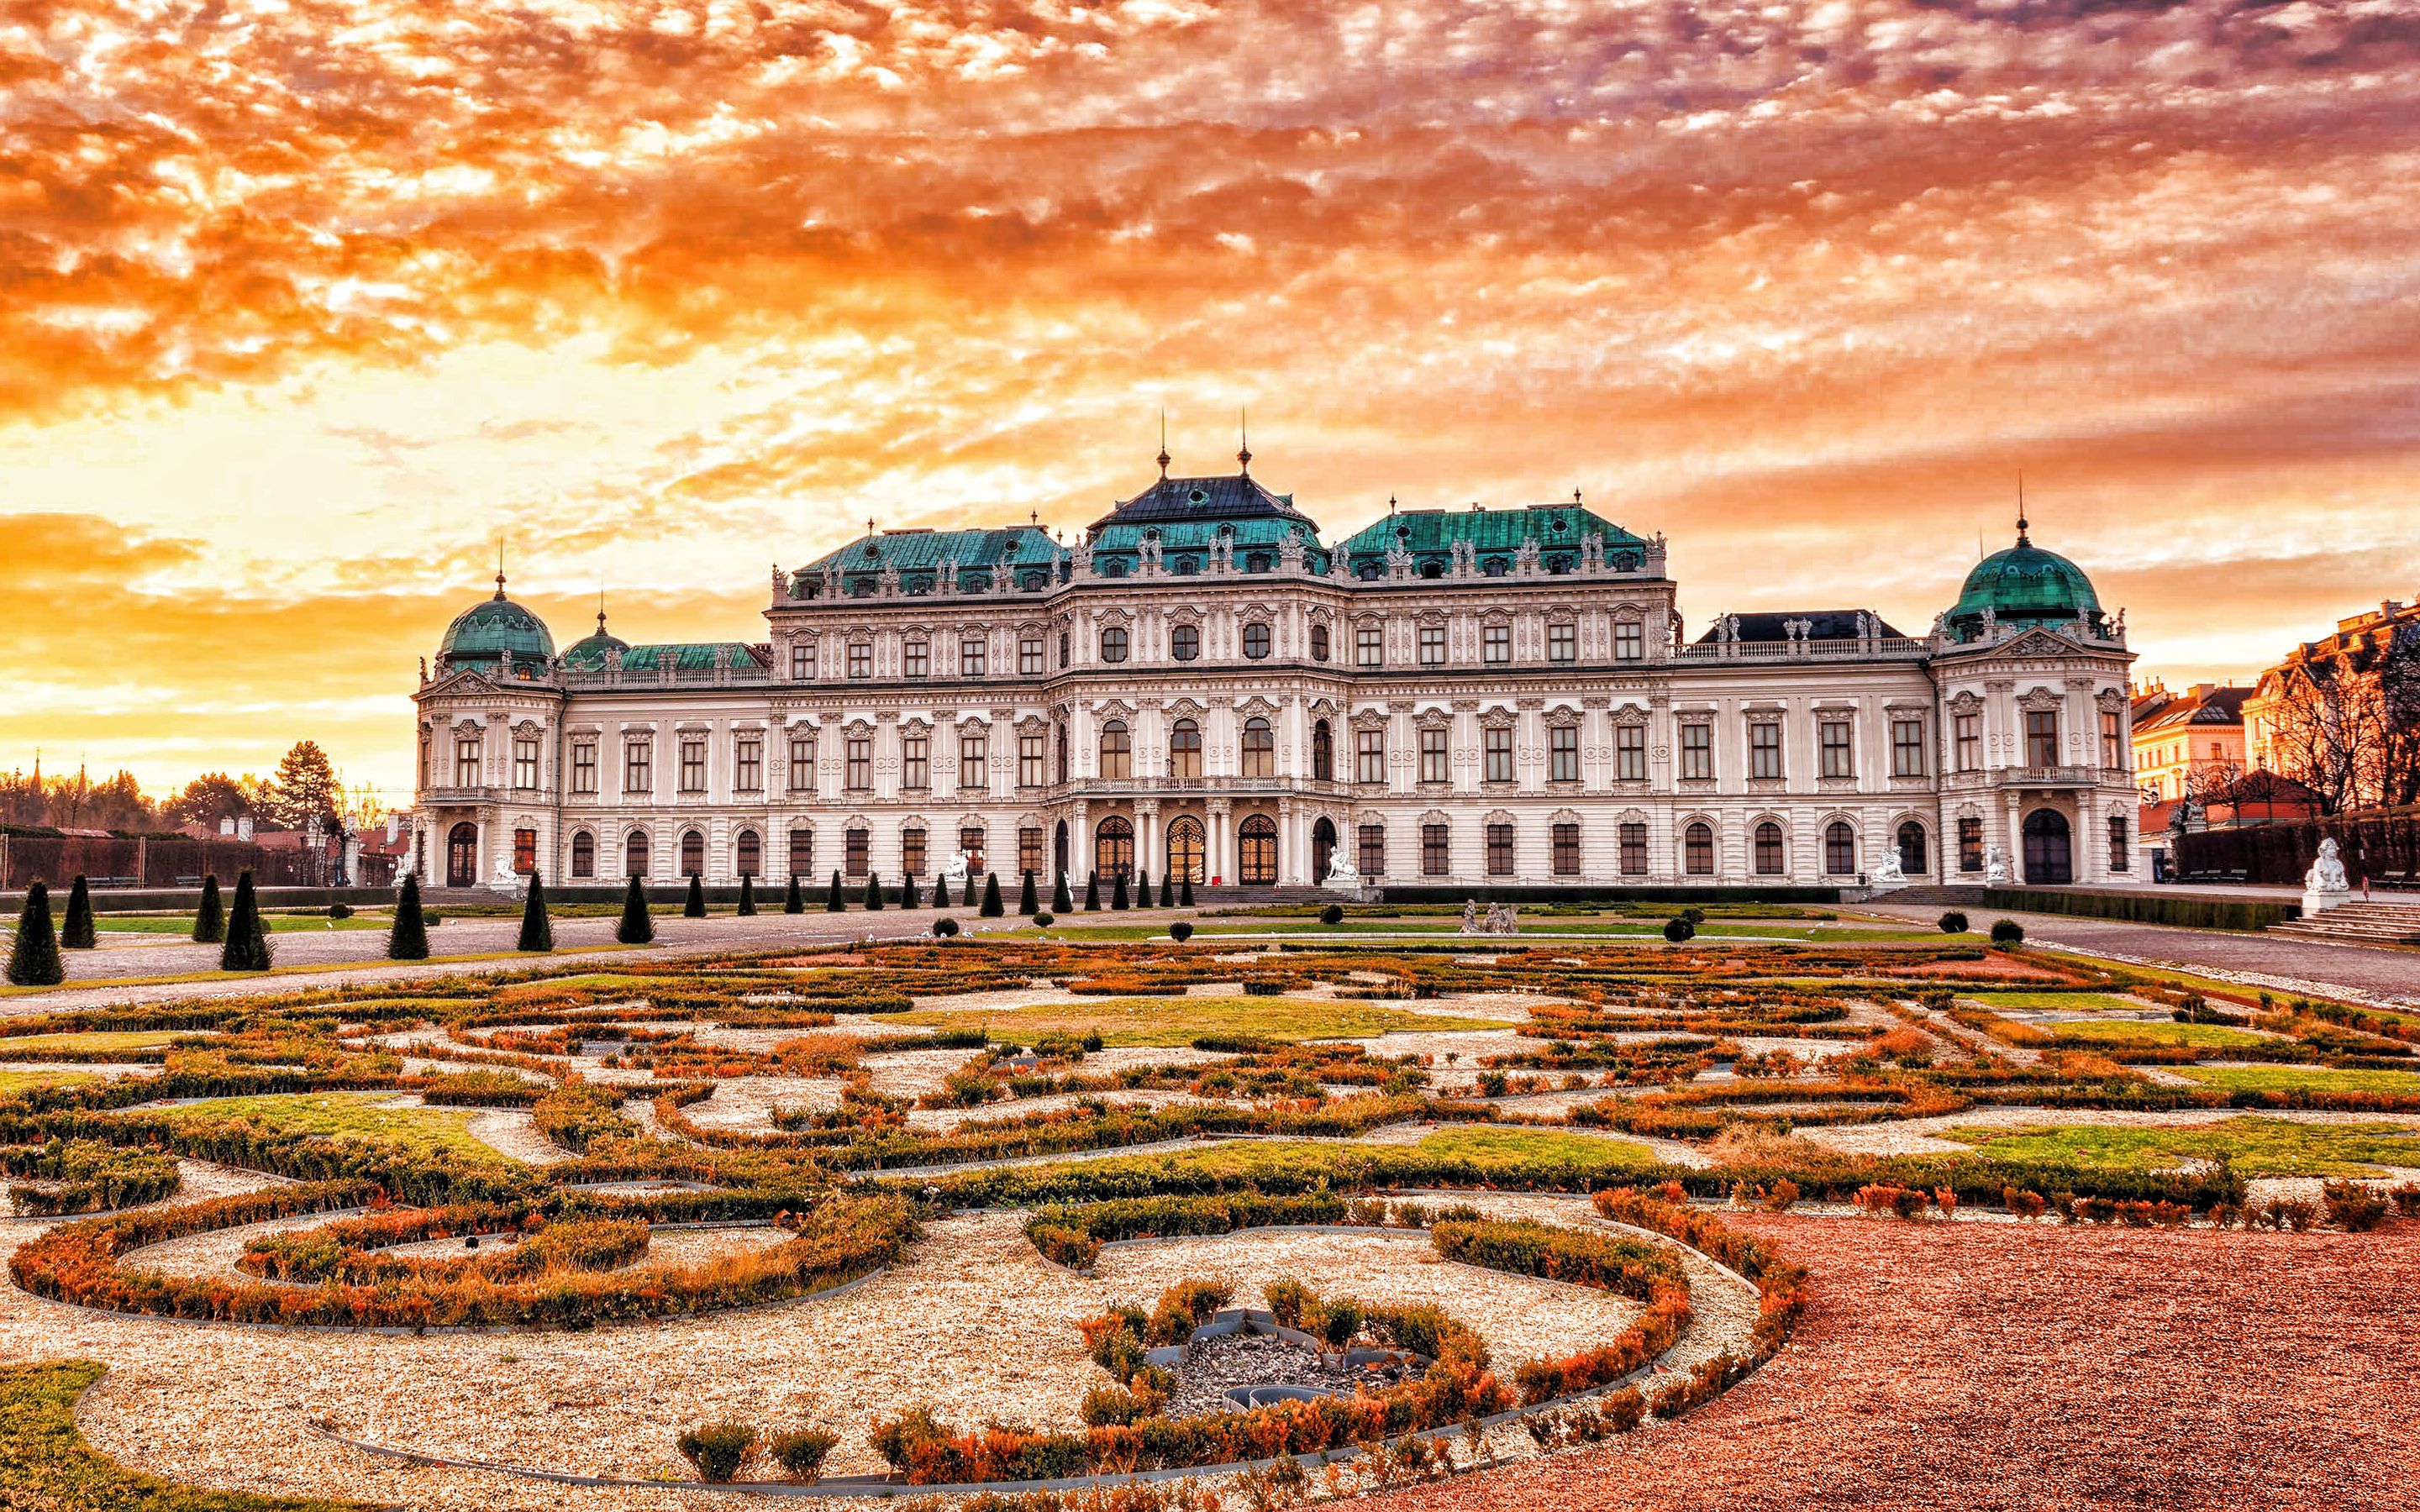 Download wallpaper Belvedere, Vienna, palace complex, evening, sunset, Vienna landmark, Baroque palaces, Austria for desktop with resolution 2880x1800. High Quality HD picture wallpaper